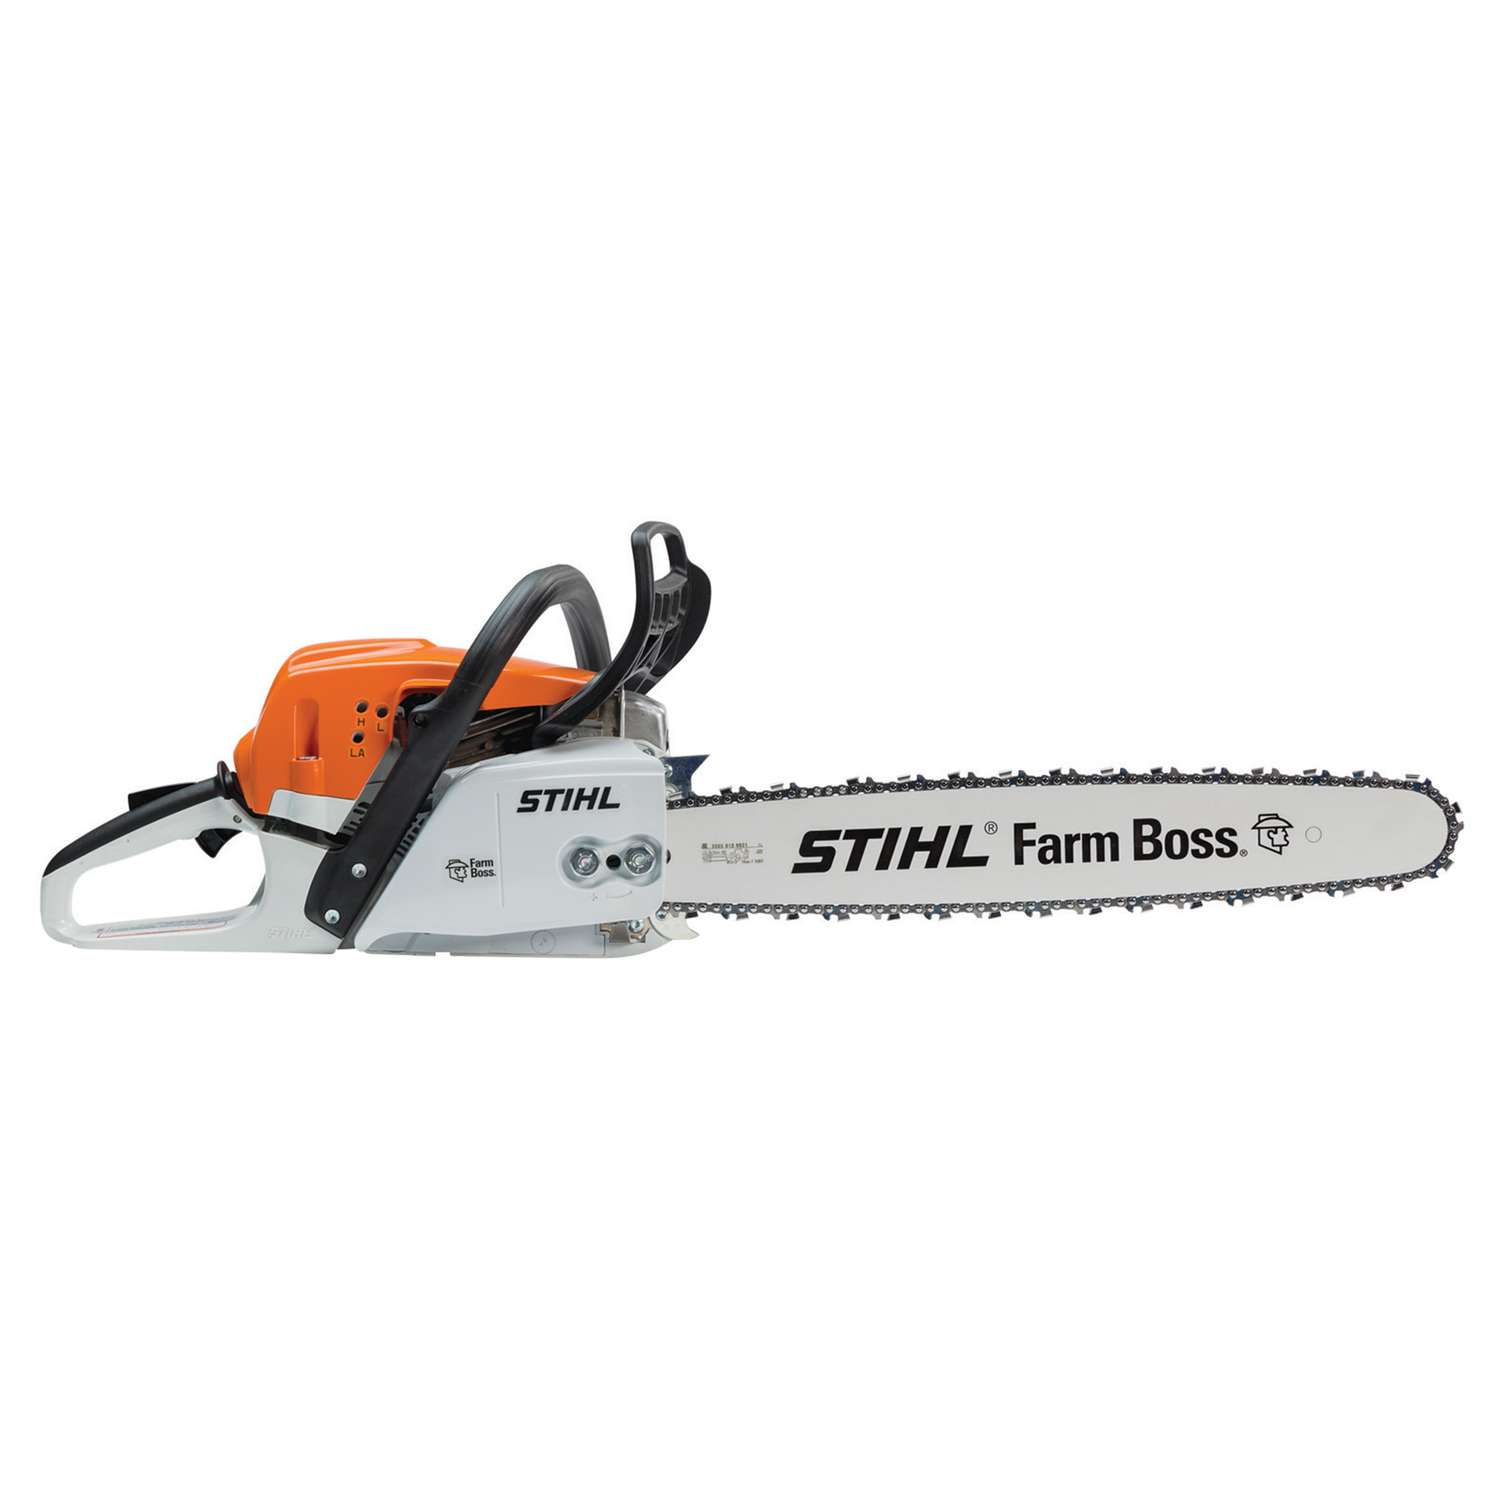 STIHL FARM BOSS MS 271 20 in. 50.2 cc Gas Chainsaw Tool Only Ace Hardware